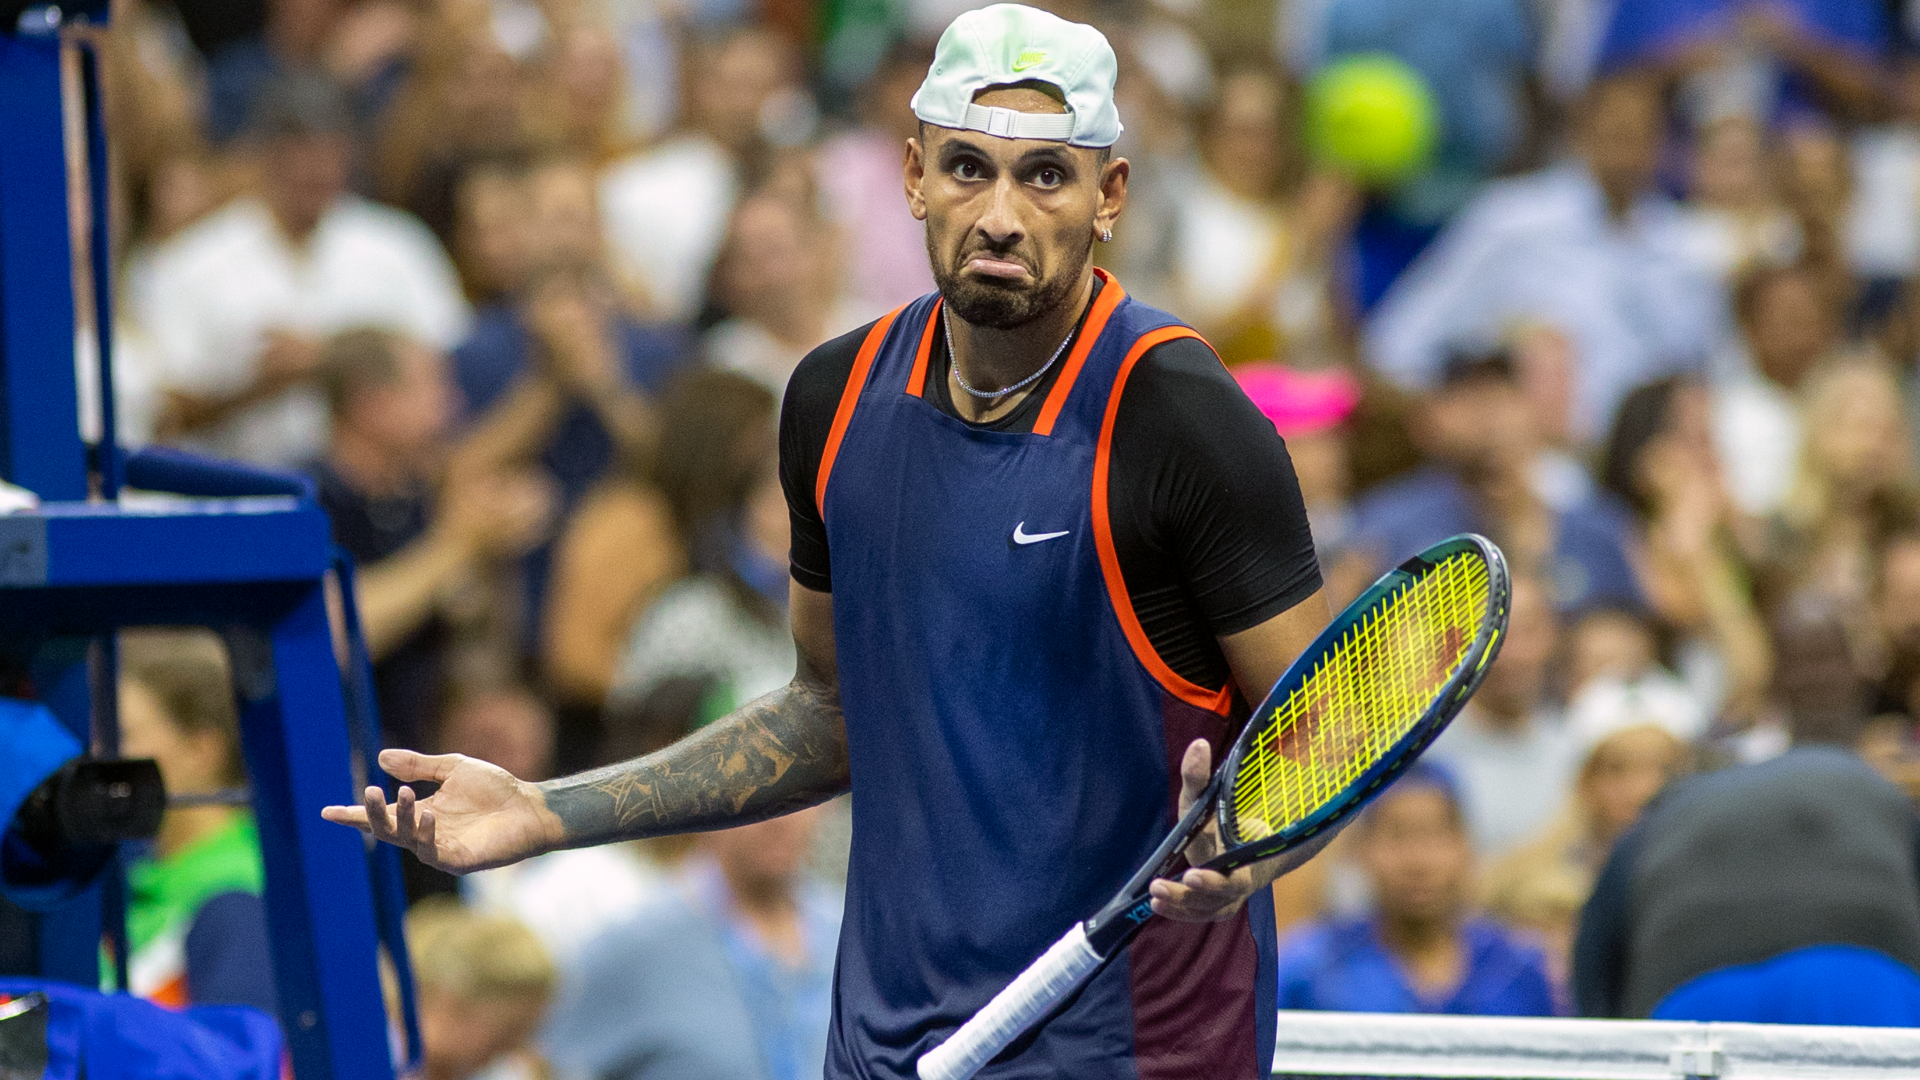 Kyrgios bemoans lack of respect after Newcombe beIN SPORTS